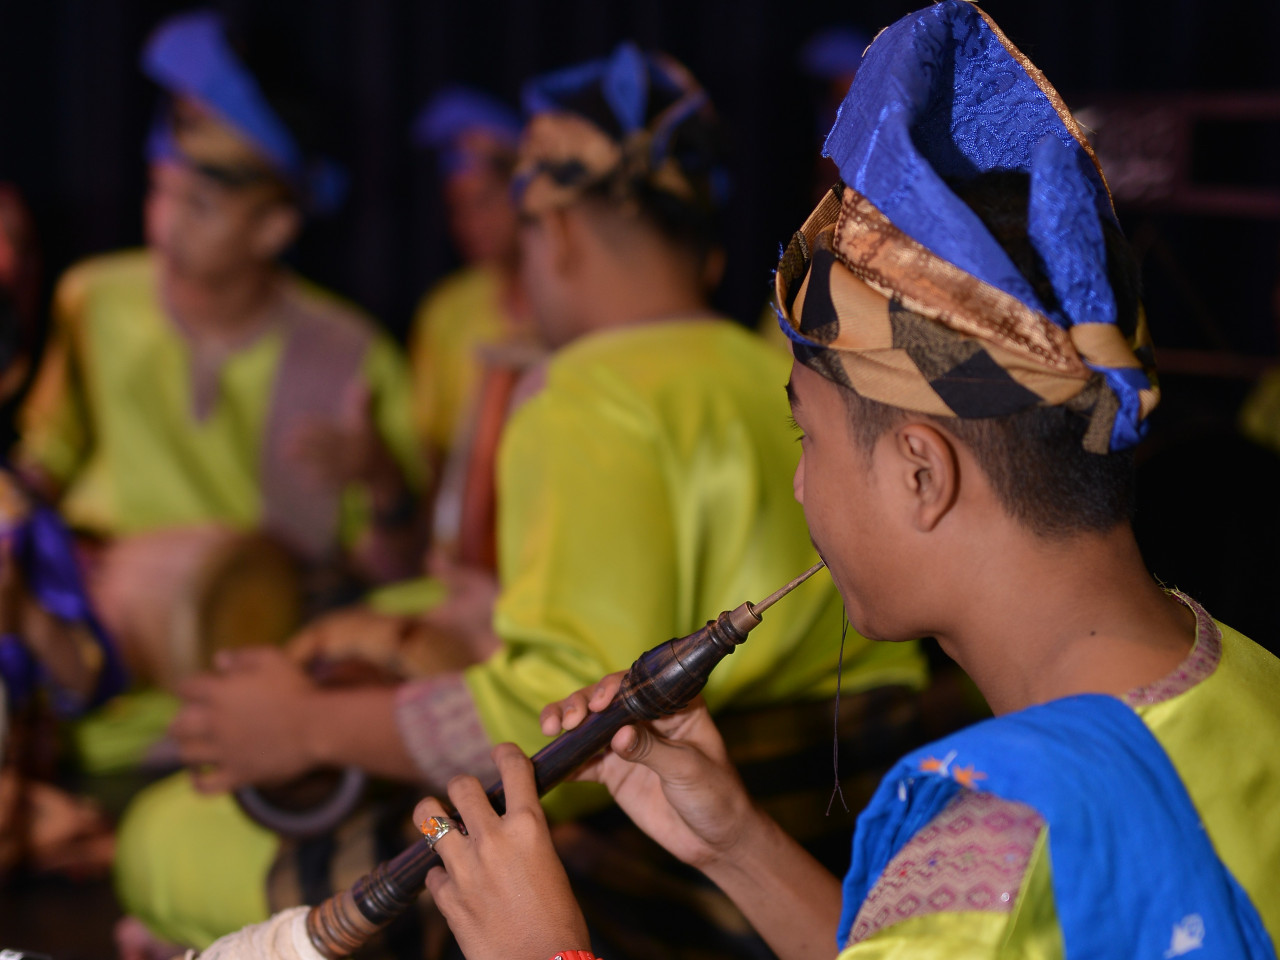 A group of talented musicians accompanied the wayang kulit performance. – Pic courtesy of bzBee Consult